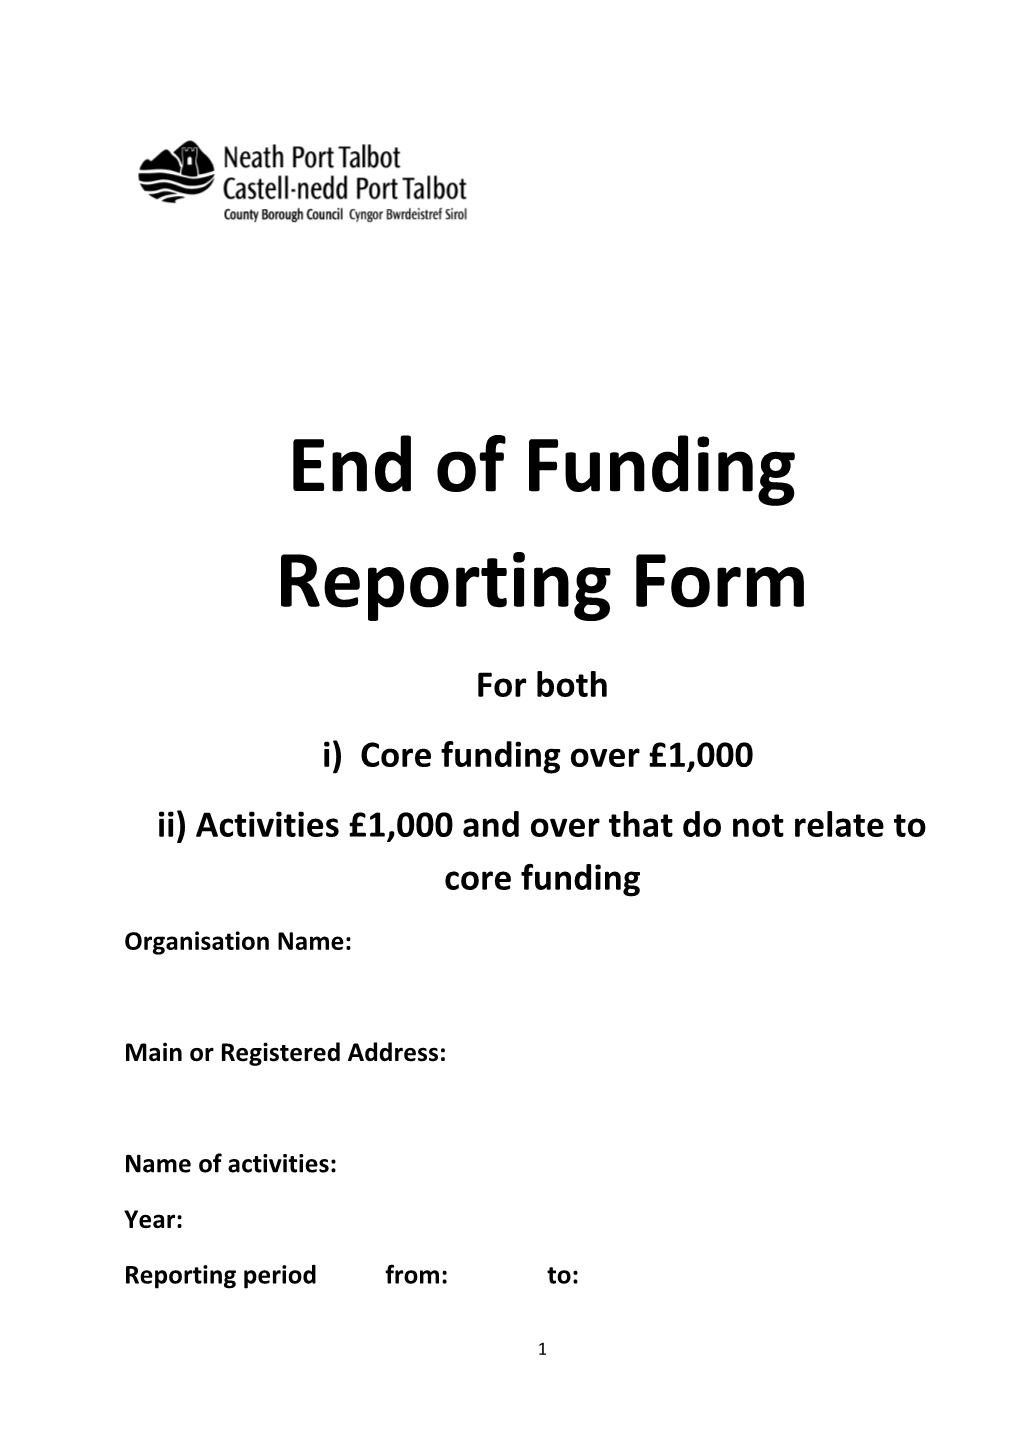 End of Funding Reporting Form